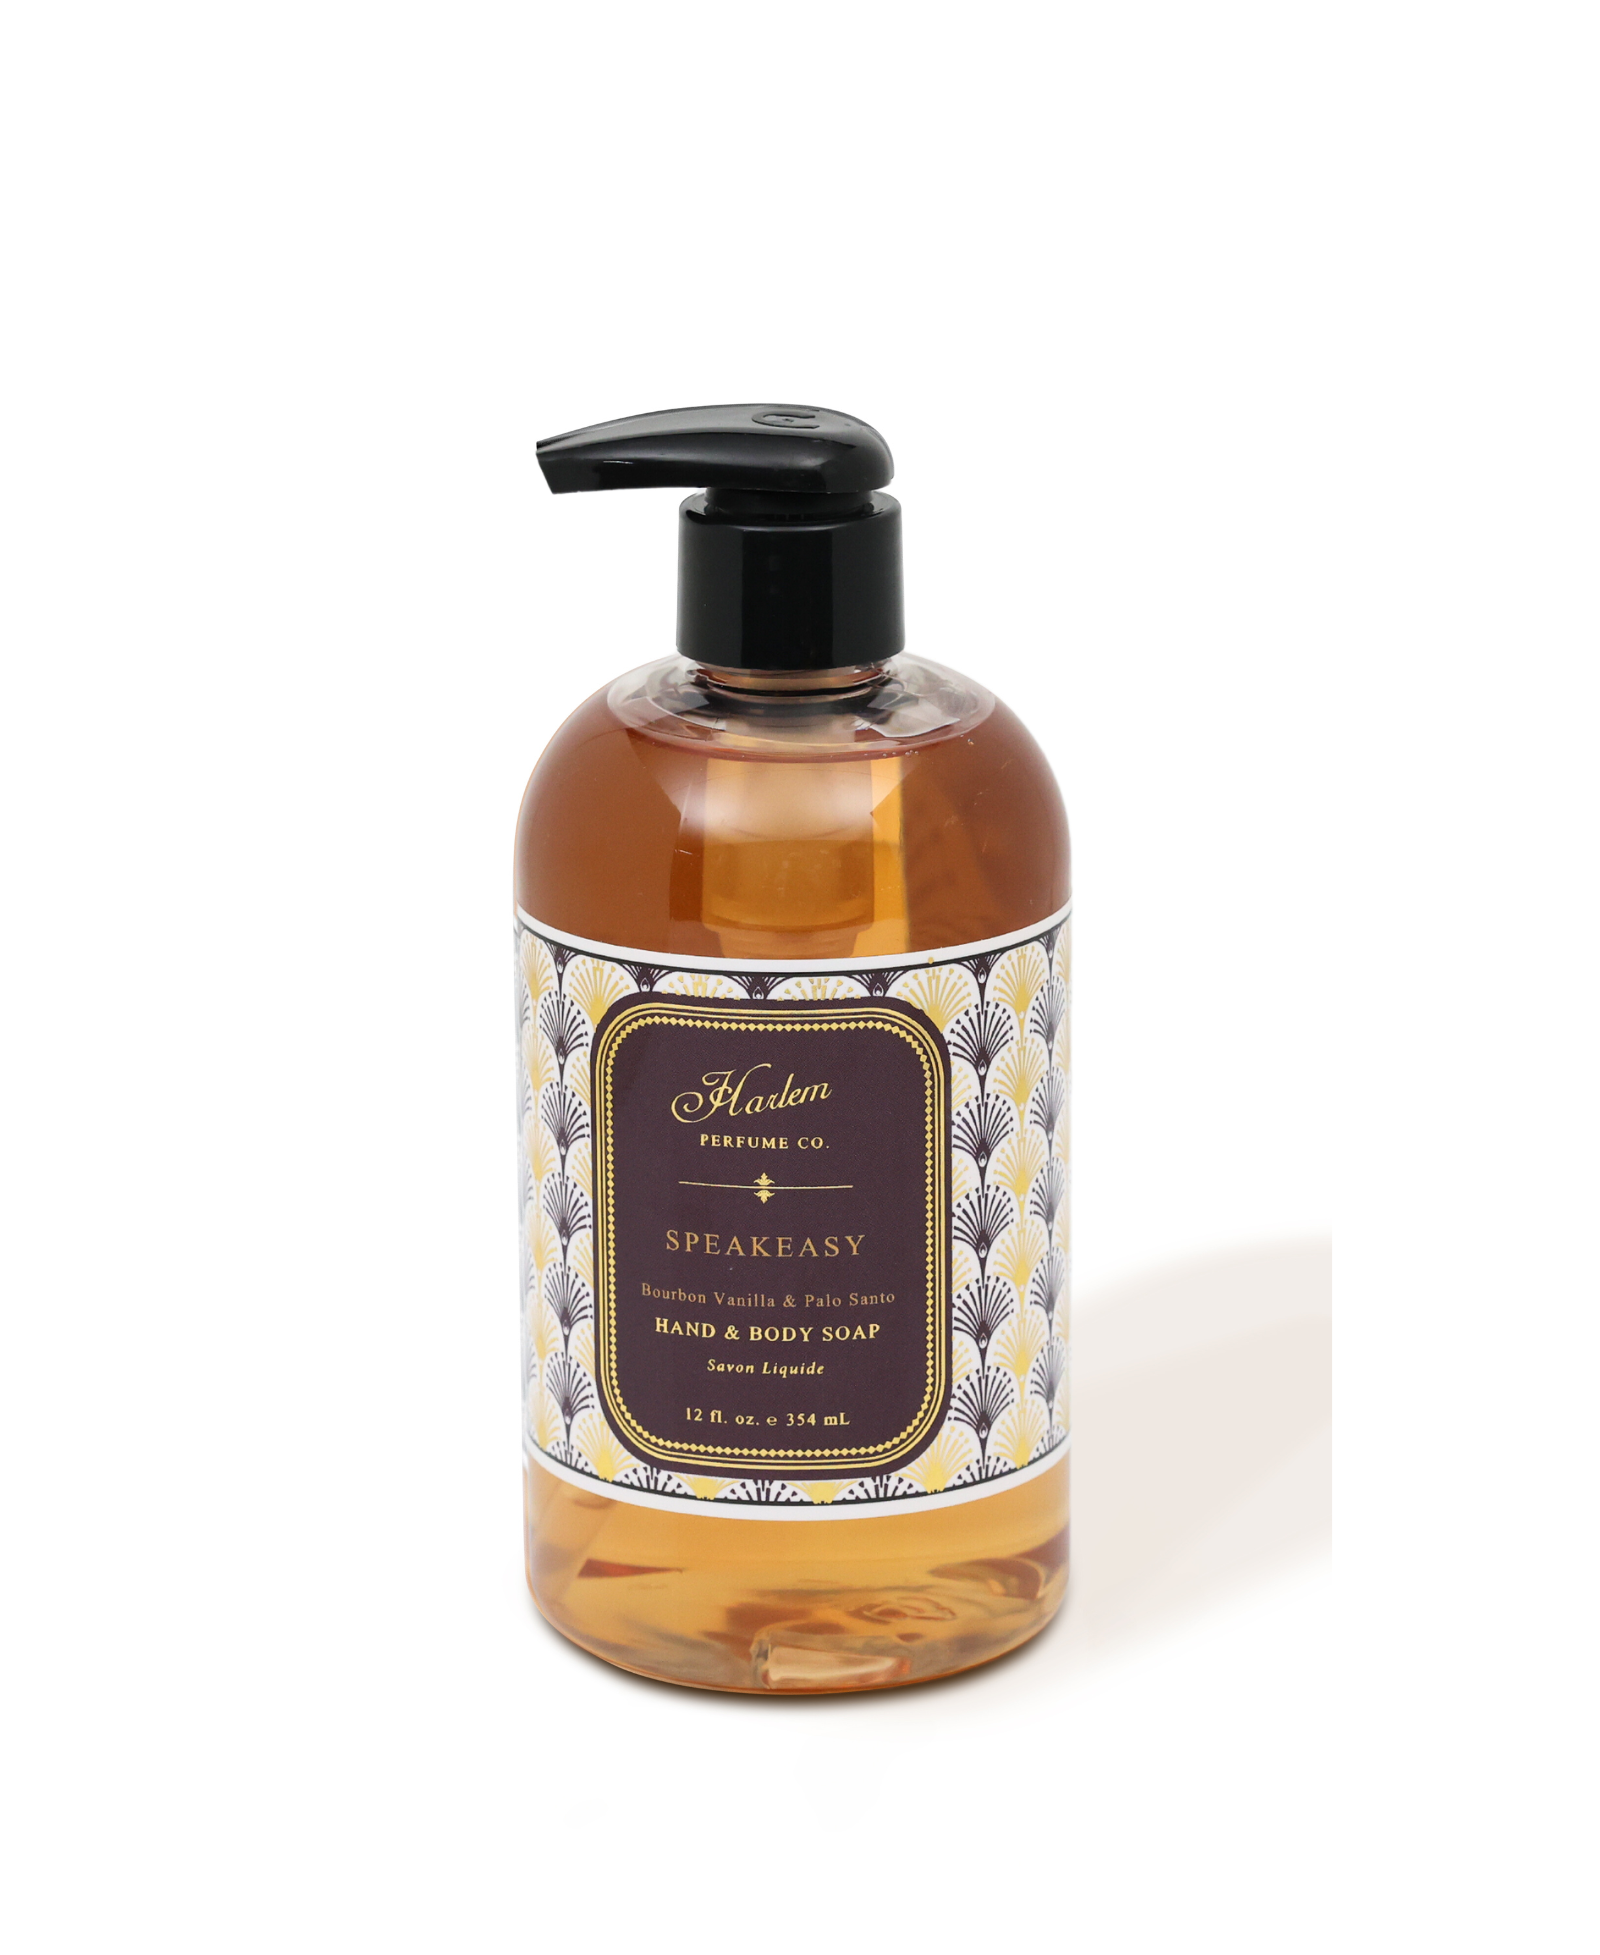 This is an image of our Speakeasy Soap in a clear PET plastic bottle with a decorative label with an art deco pattern.